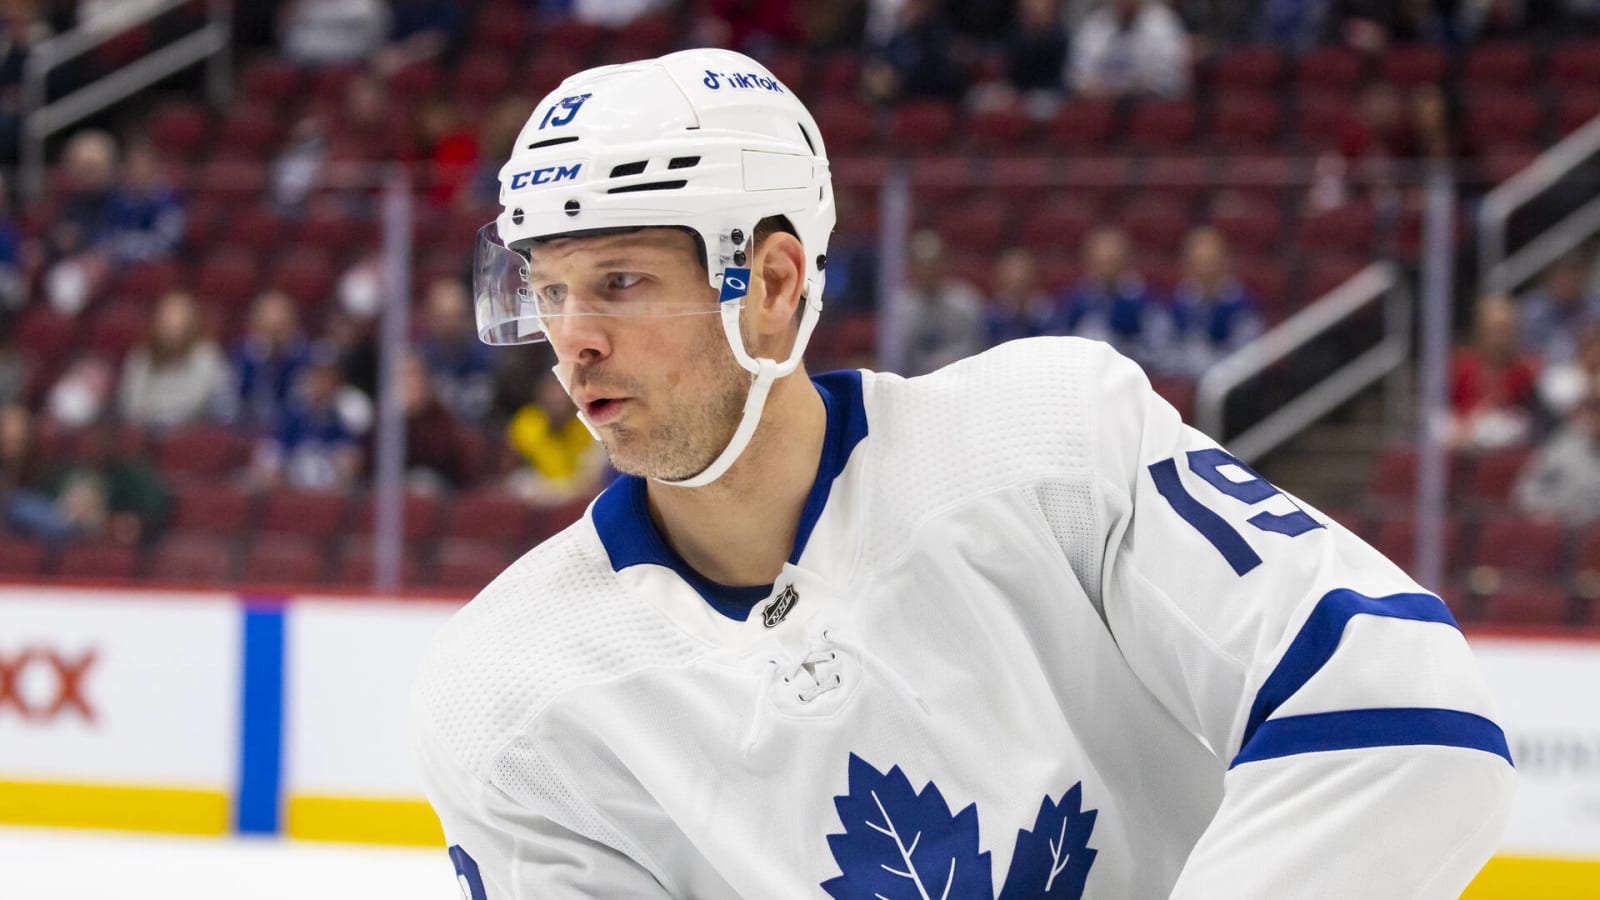 Spezza unsure of future, will only play for Maple Leafs